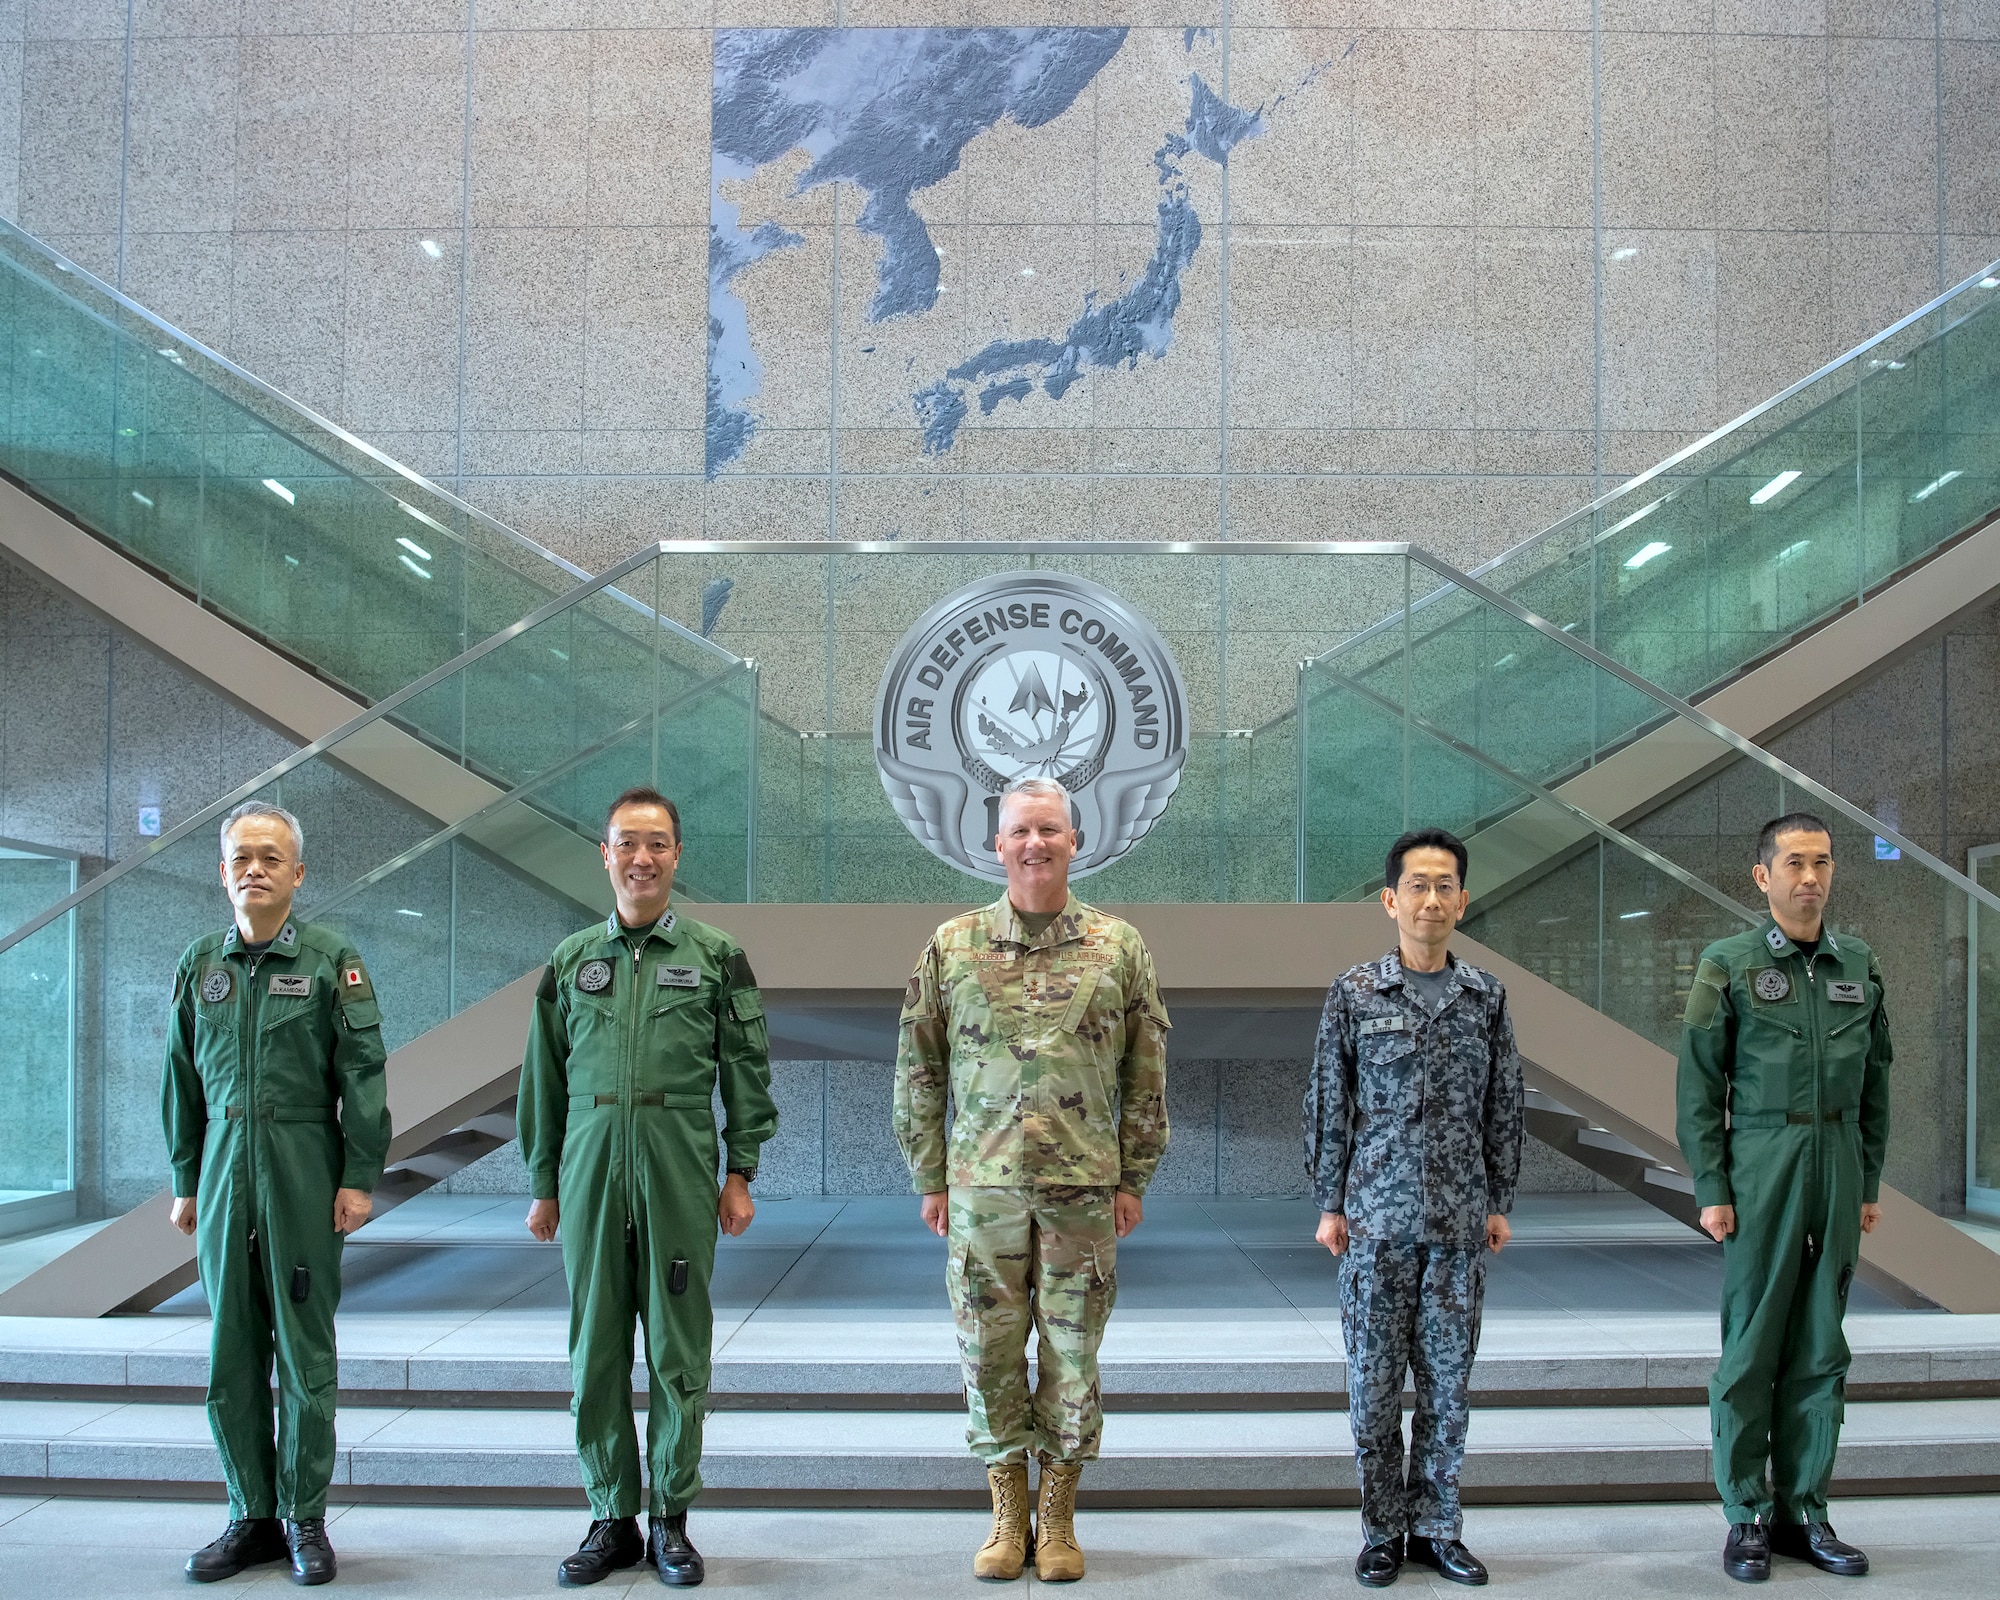 U.S. Air Force Lt. Gen. James Jacobson, Pacific Air Forces deputy commander, center, and Japan Air Self-Defense Force Lt. Gen. Hiroaki Uchikura, Air Defense Command commander, second left, pose for a photo with JASDF senior leaders in the JASDF ADC headquarters at Yokota Air Base, Japan, Aug. 22, 2022. Jacobson toured the ADC headquarters where approximately 800 JASDF personnel work at Yokota. (U.S. Air Force photo by Yasuo Osakabe)